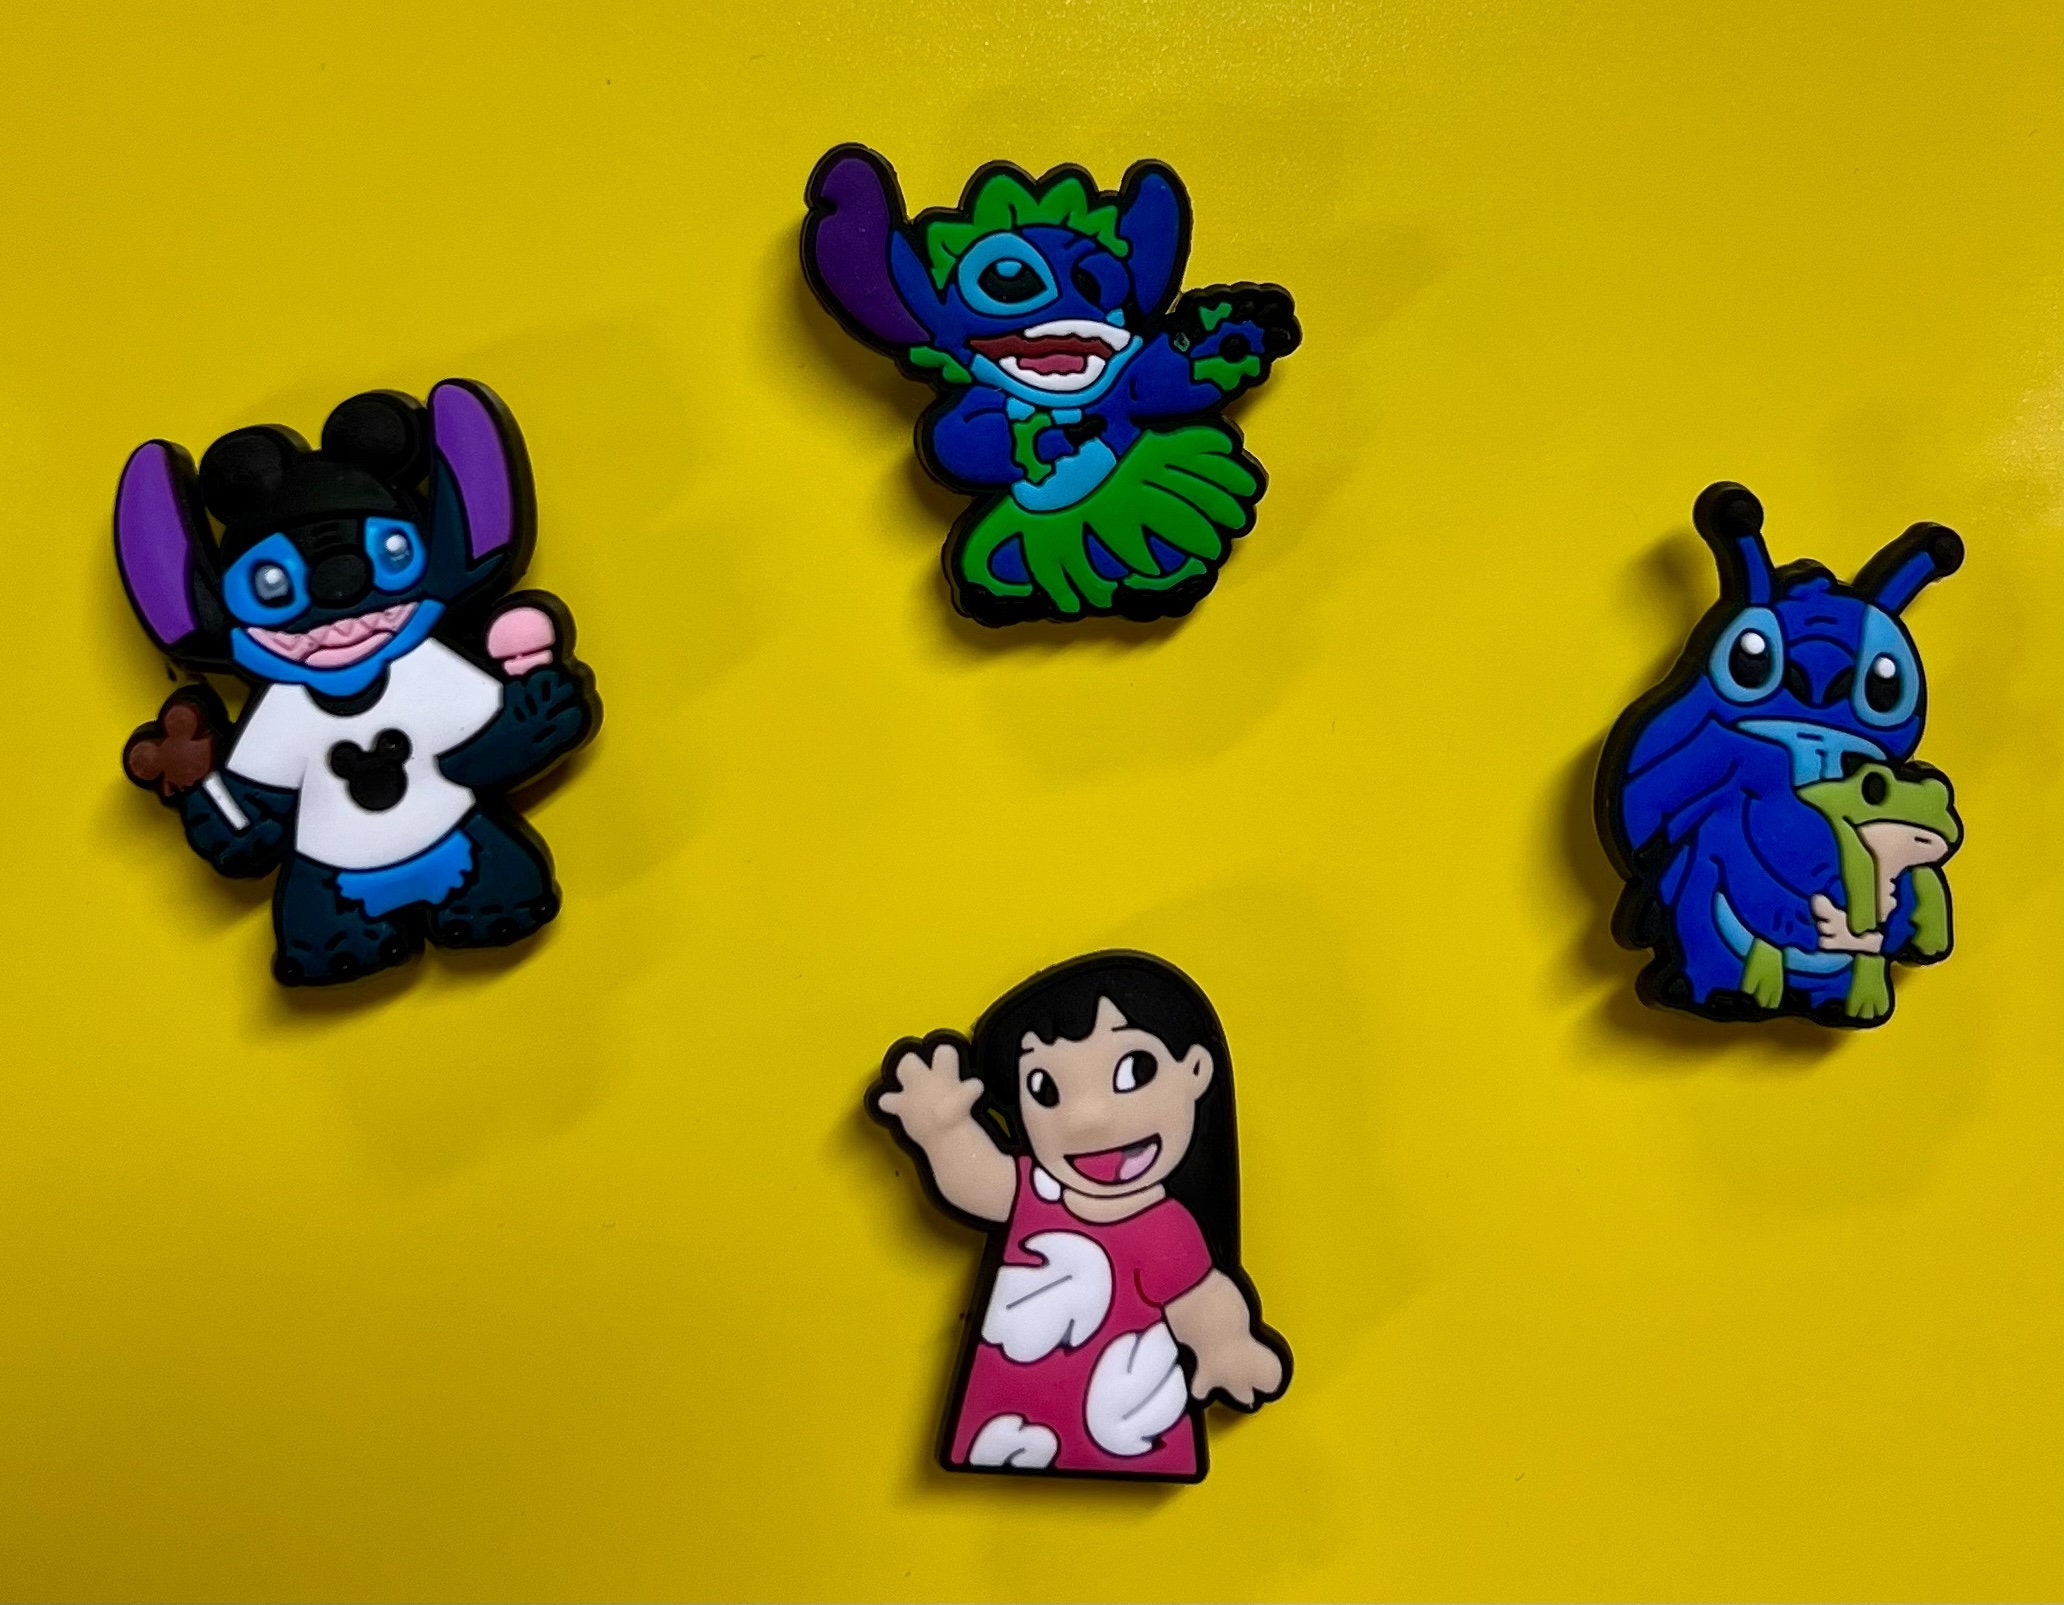 Cartoon Stitch croc charms 10pc lot/ Ind. adorable charms for your